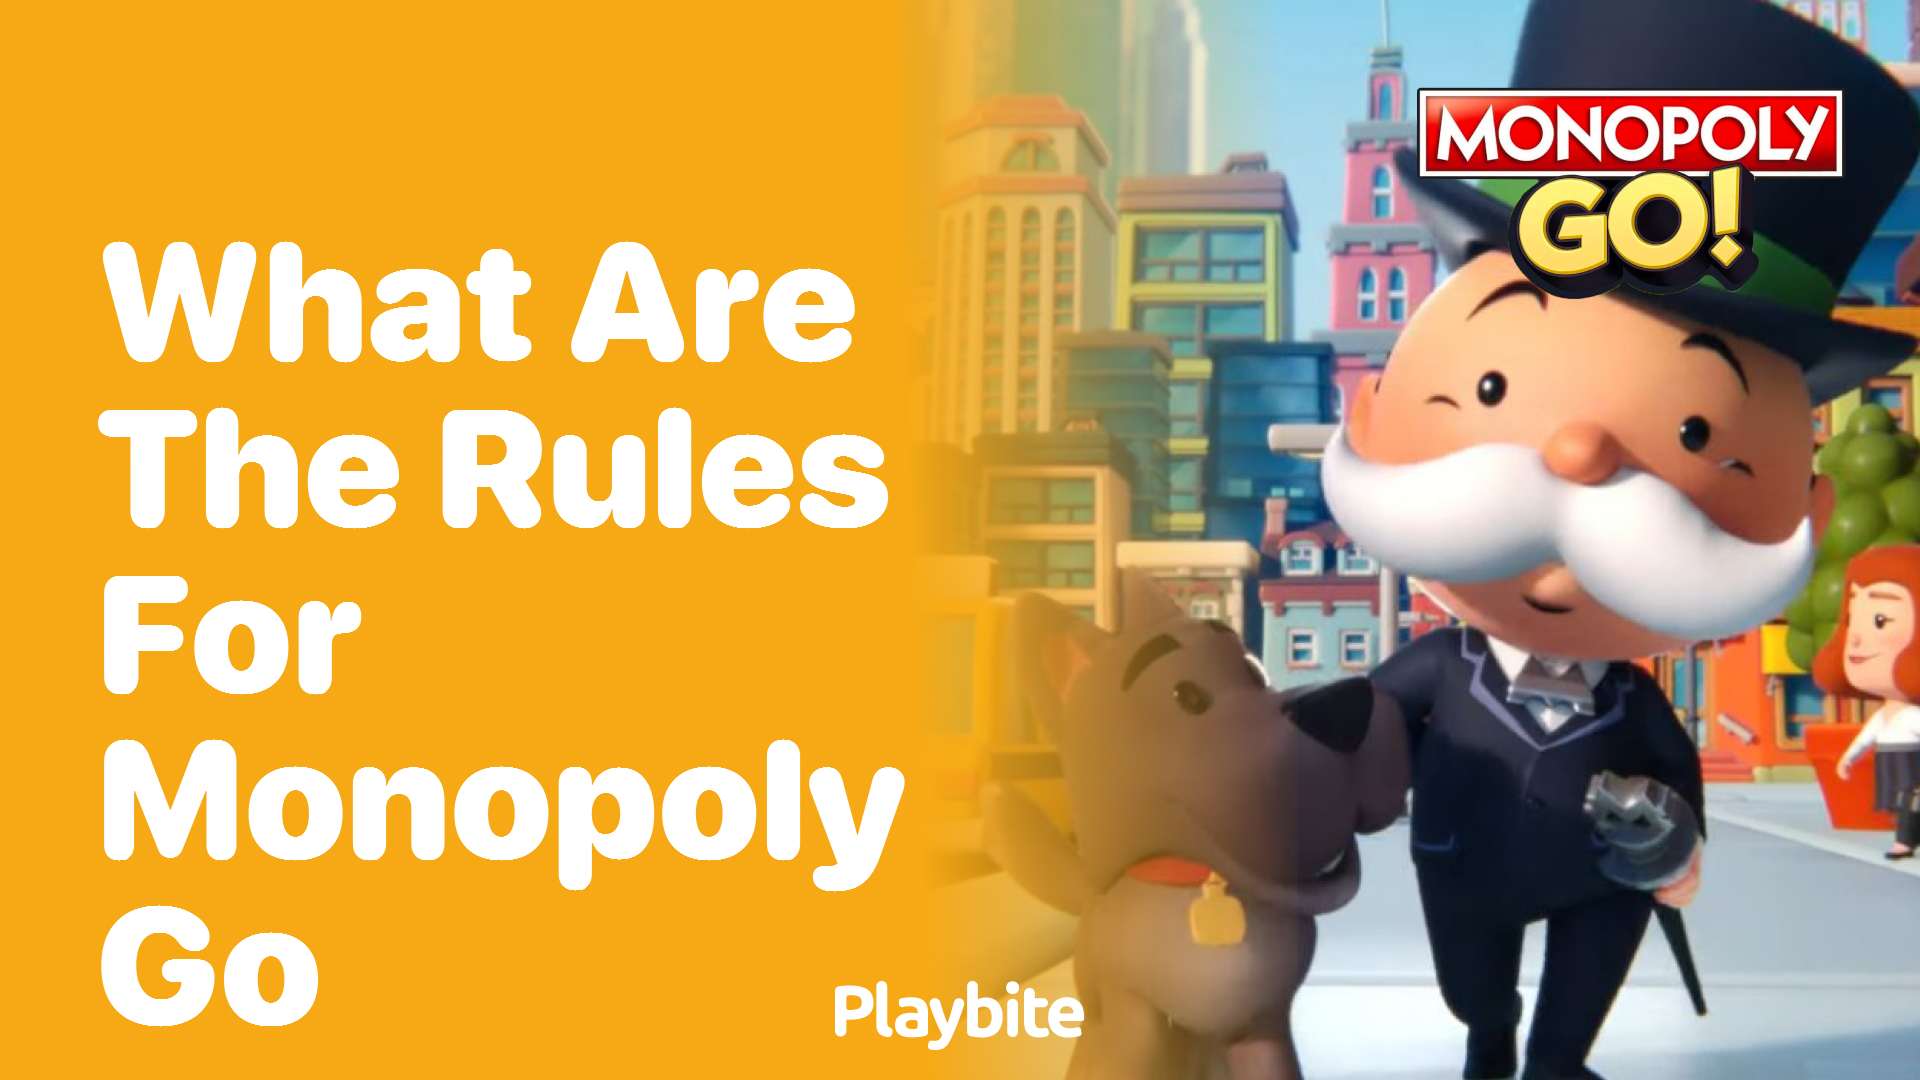 What Are the Rules for Monopoly Go? Get the Scoop Here!